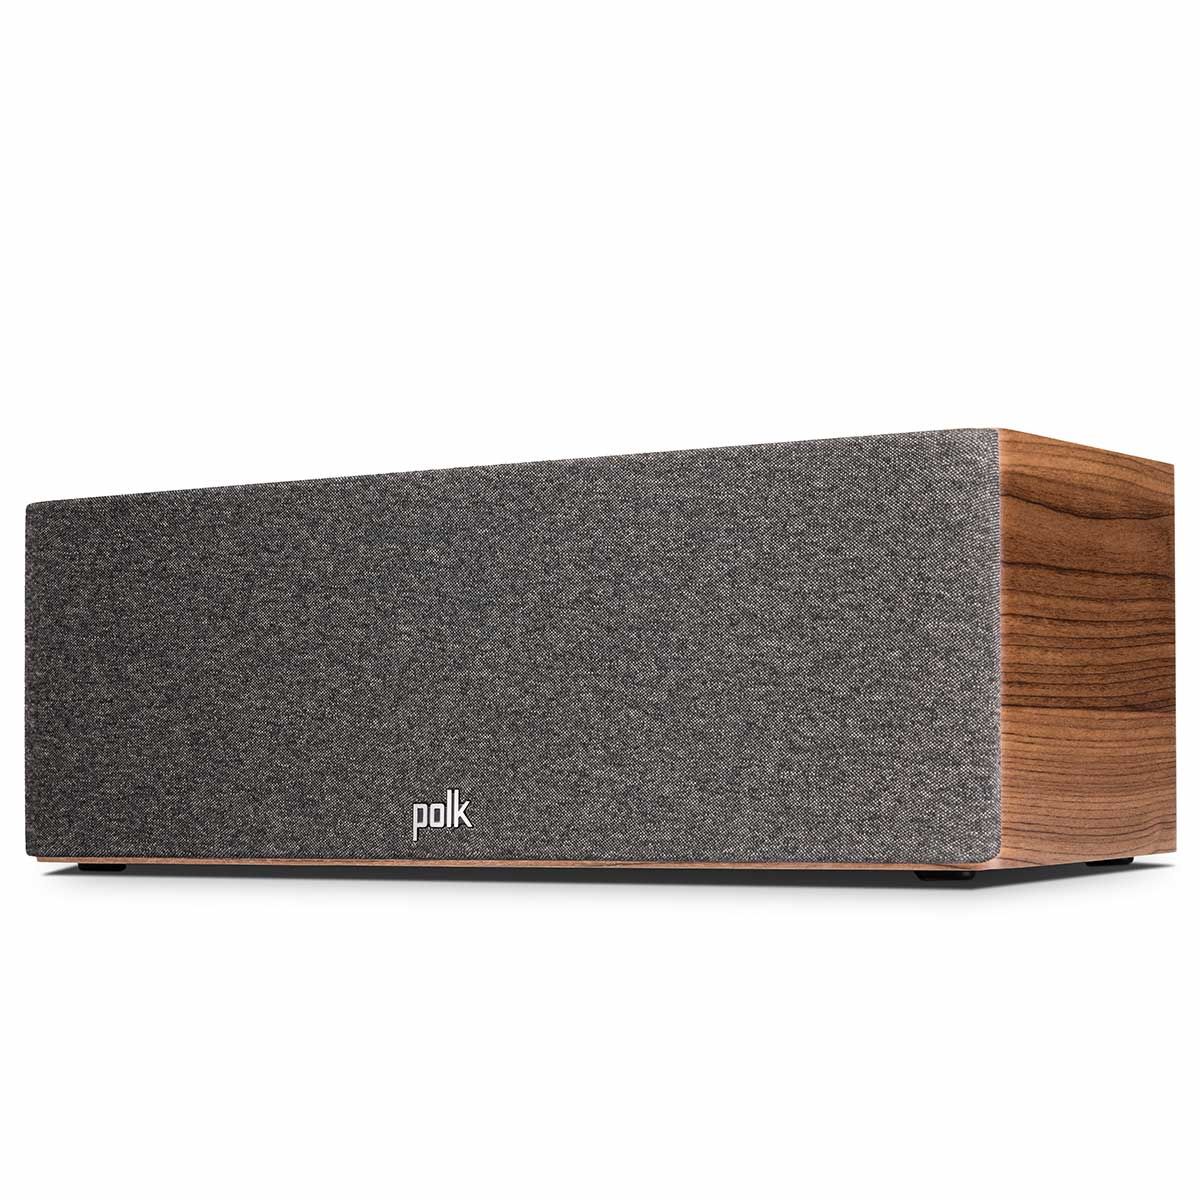 Polk R300 Speaker, Walnut, front left angle with grille